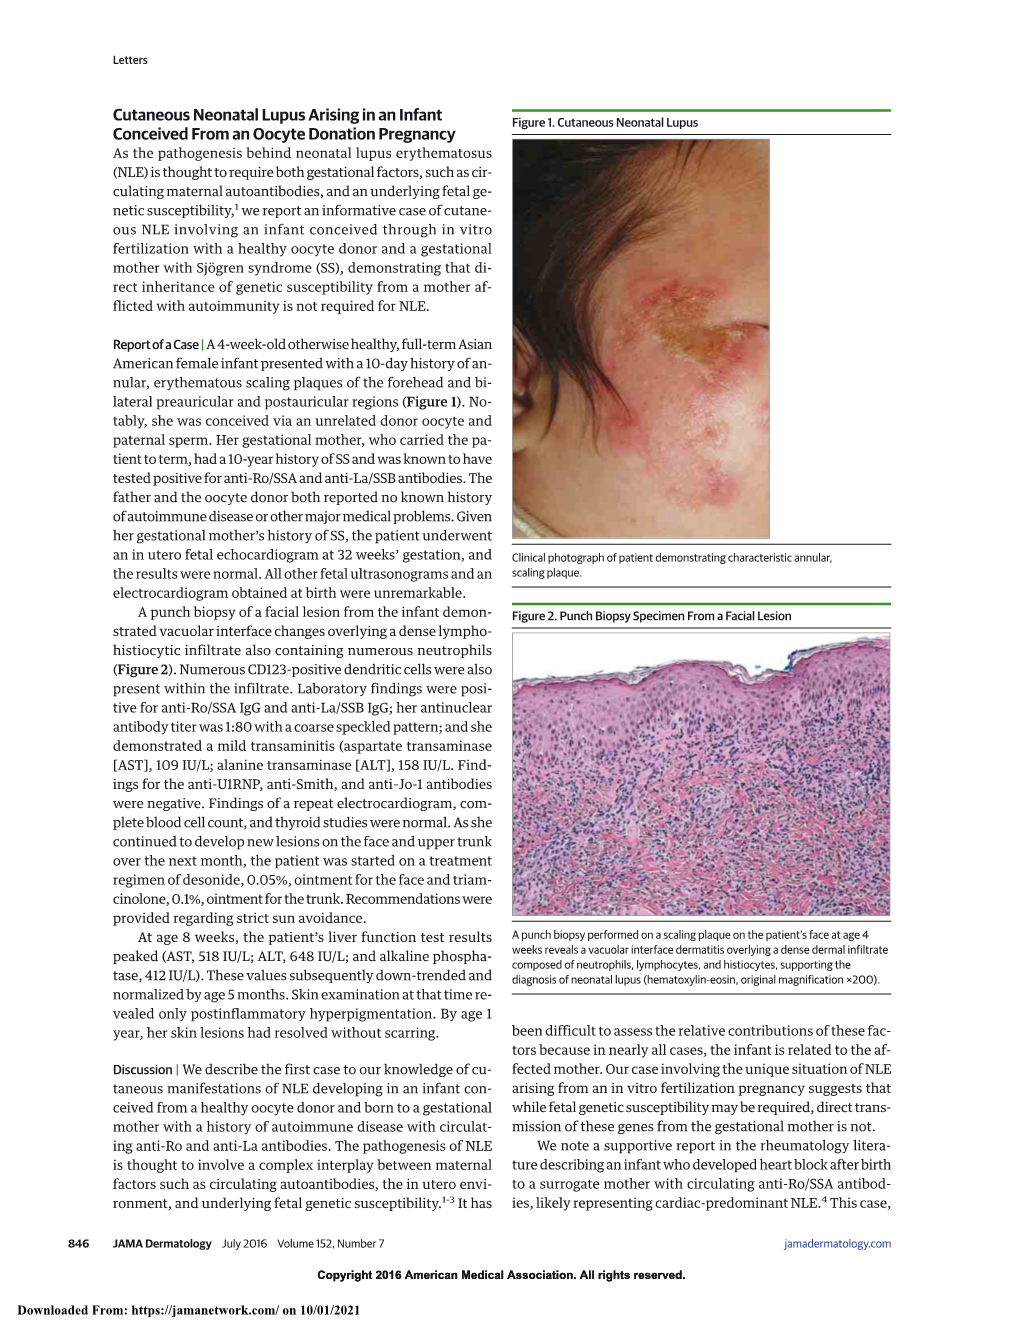 Cutaneous Neonatal Lupus Arising in an Infant Conceived from An